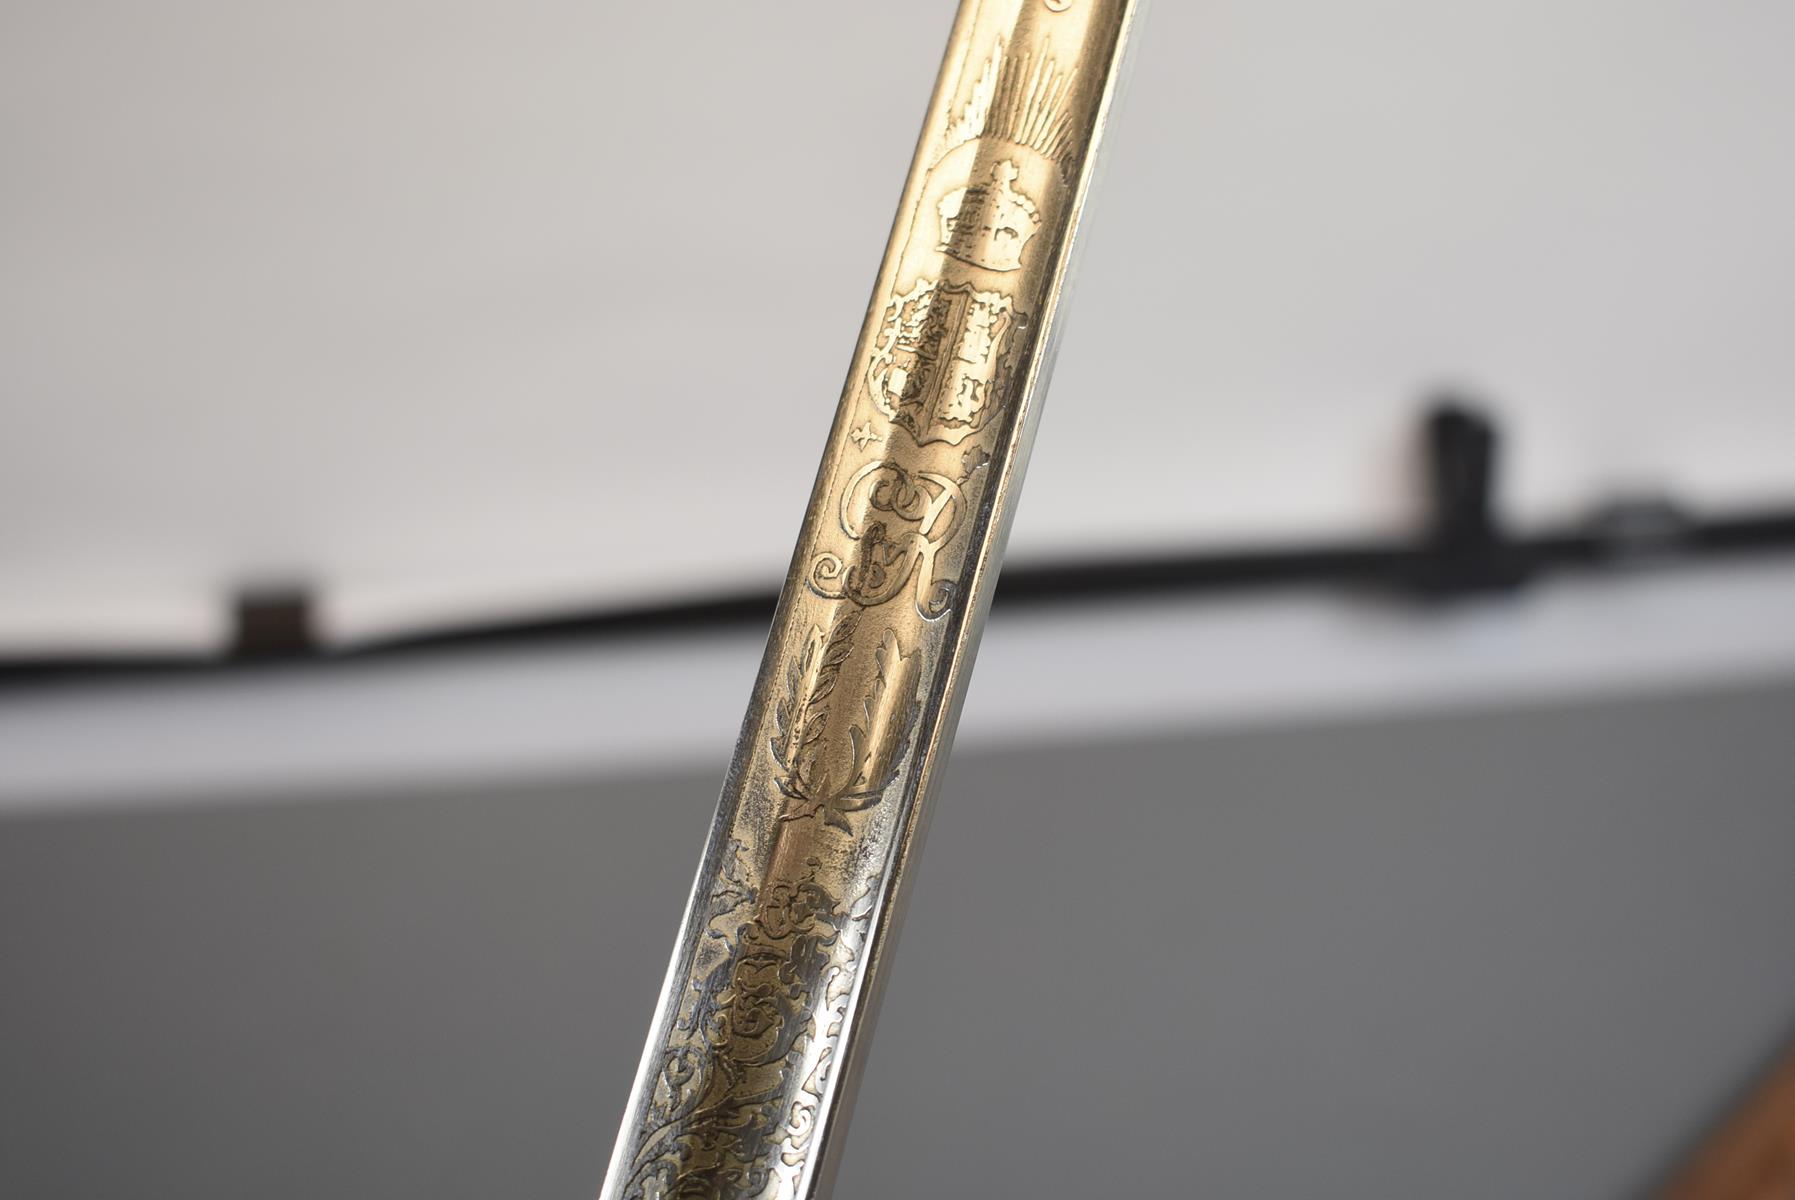 AN INDIAN 1912 PATTERN CAVALRY OFFICER'S SWORD, 89.5cm blade poorly etched with scrolling foliage - Image 6 of 11